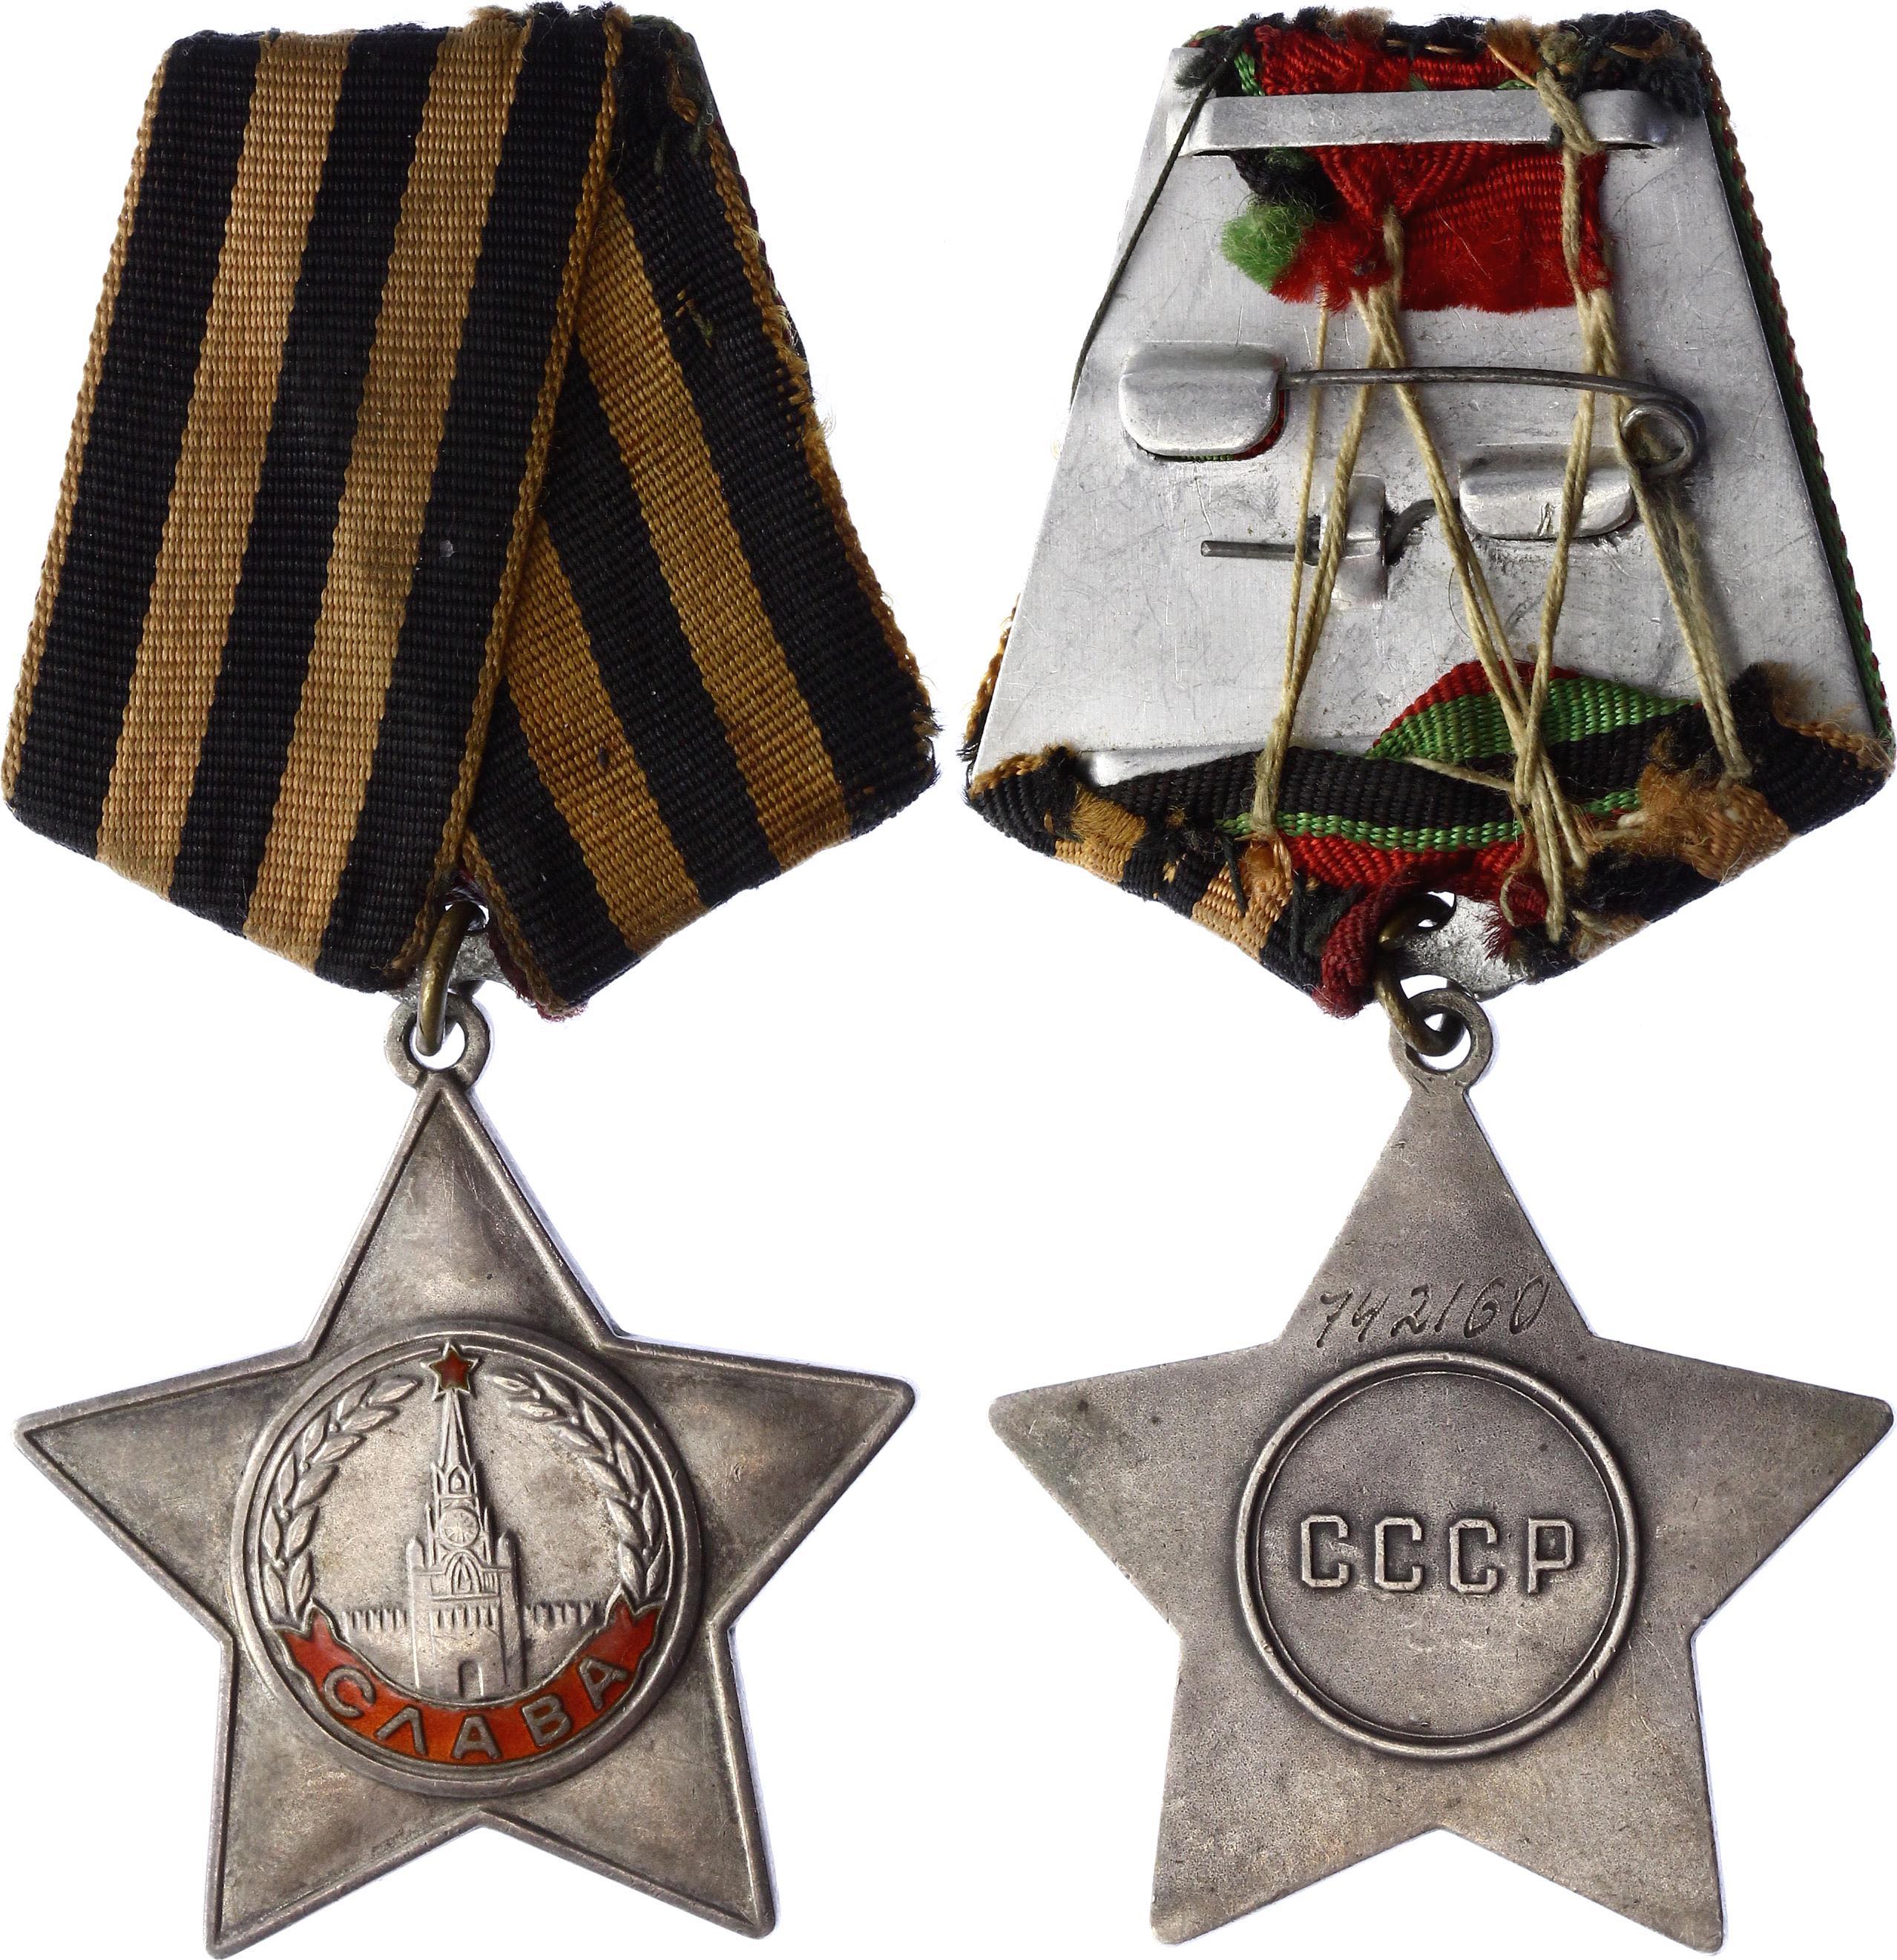 Russia - USSR Order of Glory 3rd Class